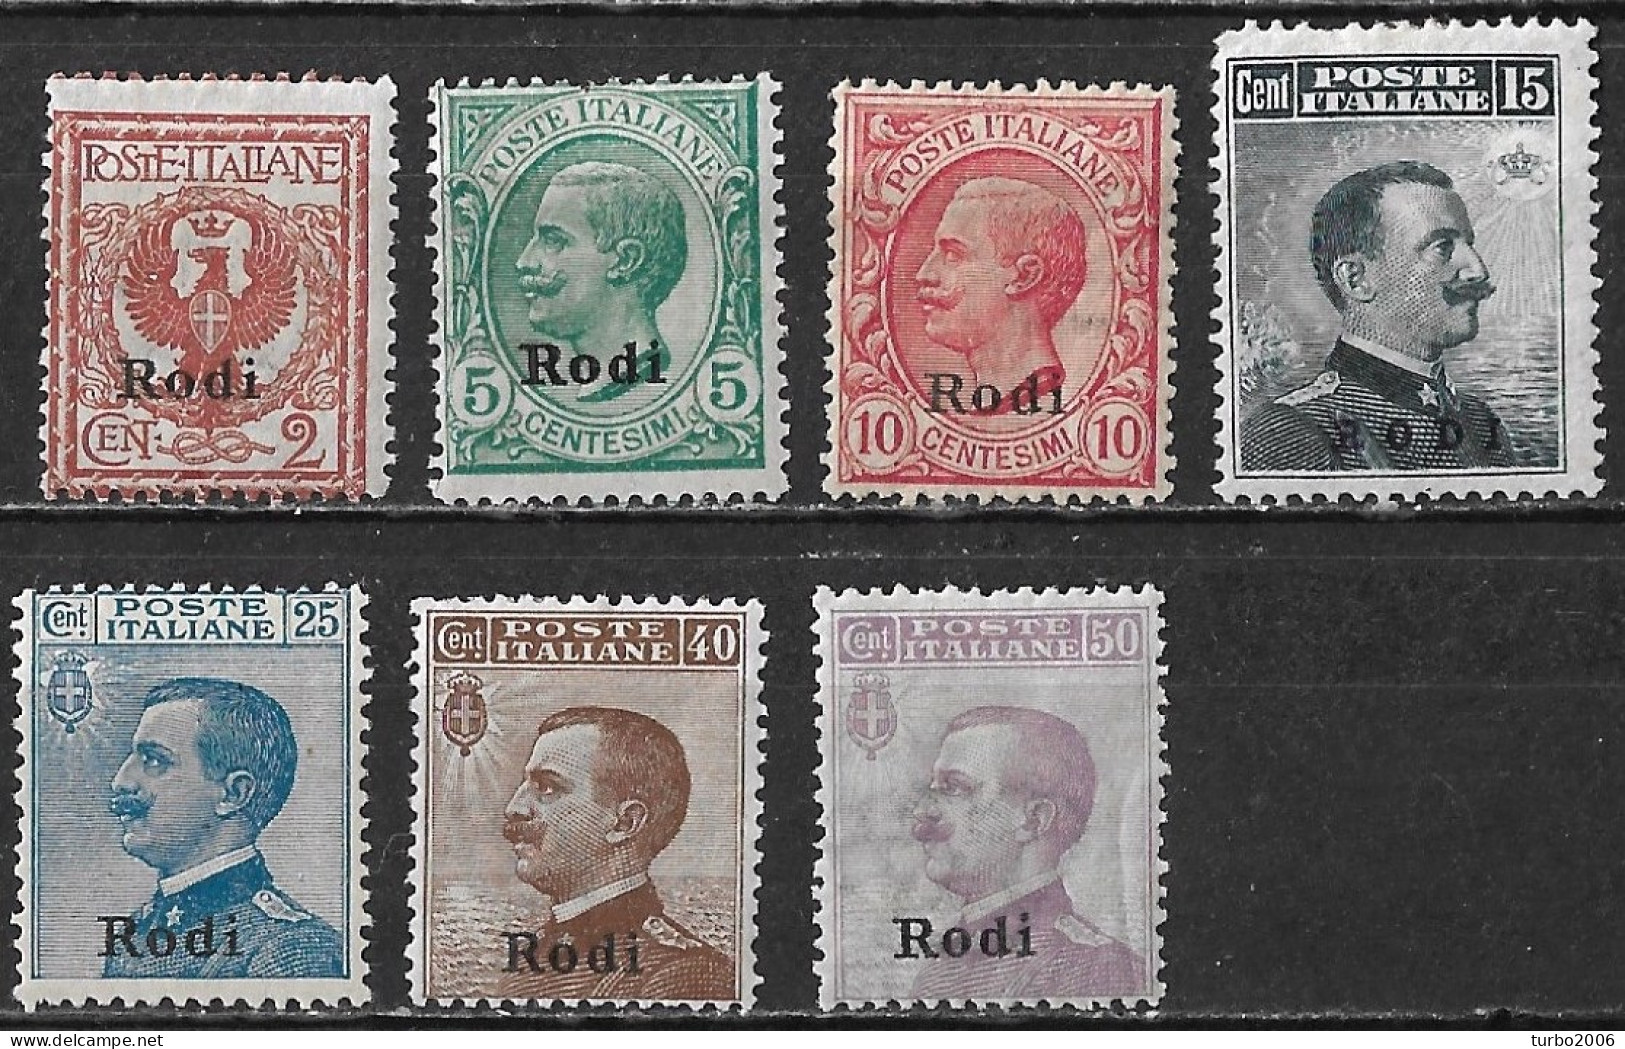 DODECANESE 1912 Stamps Of Italy With Black Overprint RODI Complete MH Set Vl. 1 / 7 - Dodekanesos